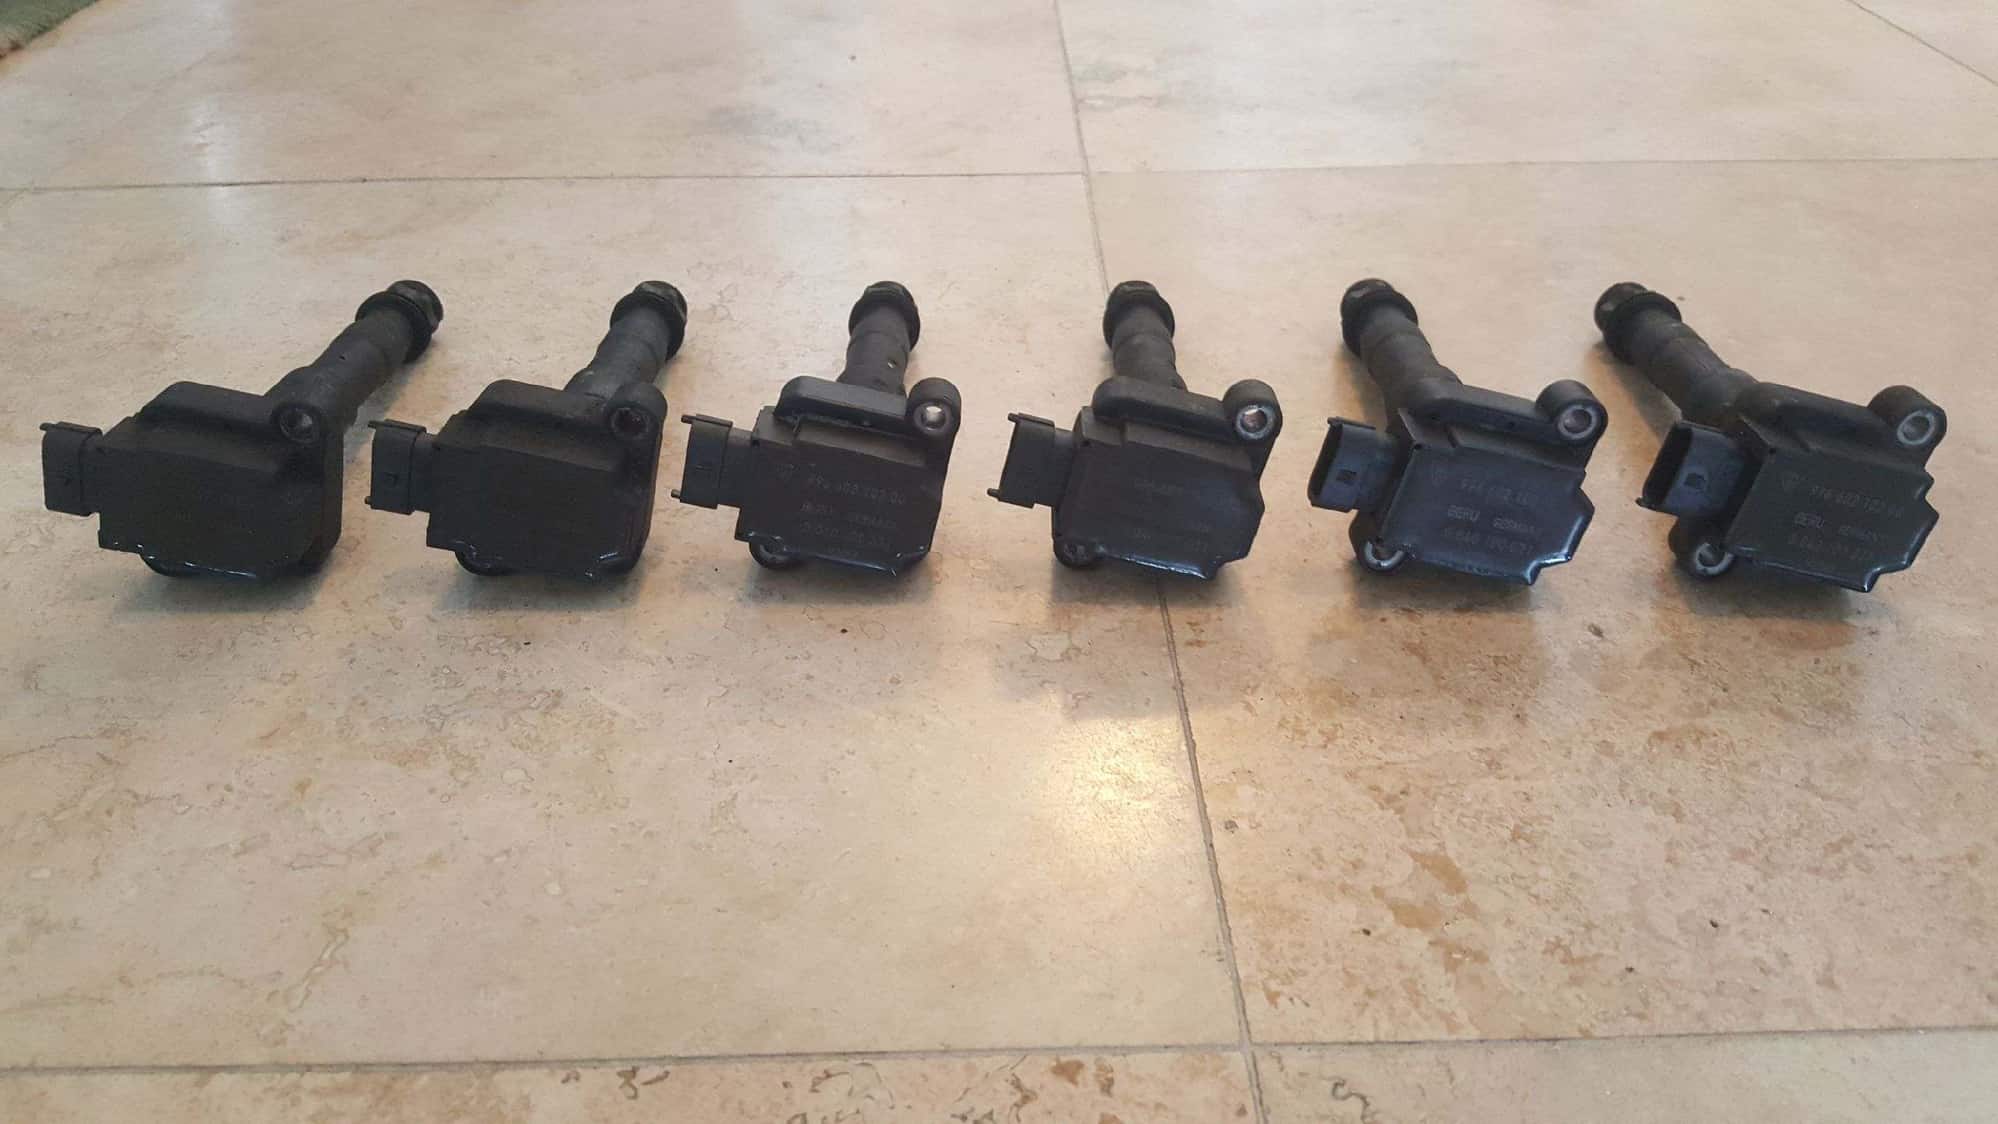 Engine - Electrical - 911 996 986 Boxster OEM Ignition Coils And OEM Shifter With Cables - Used - 1999 to 2012 Porsche 911 - 1997 to 2004 Porsche Boxster - Treasure Island, FL 33706, United States